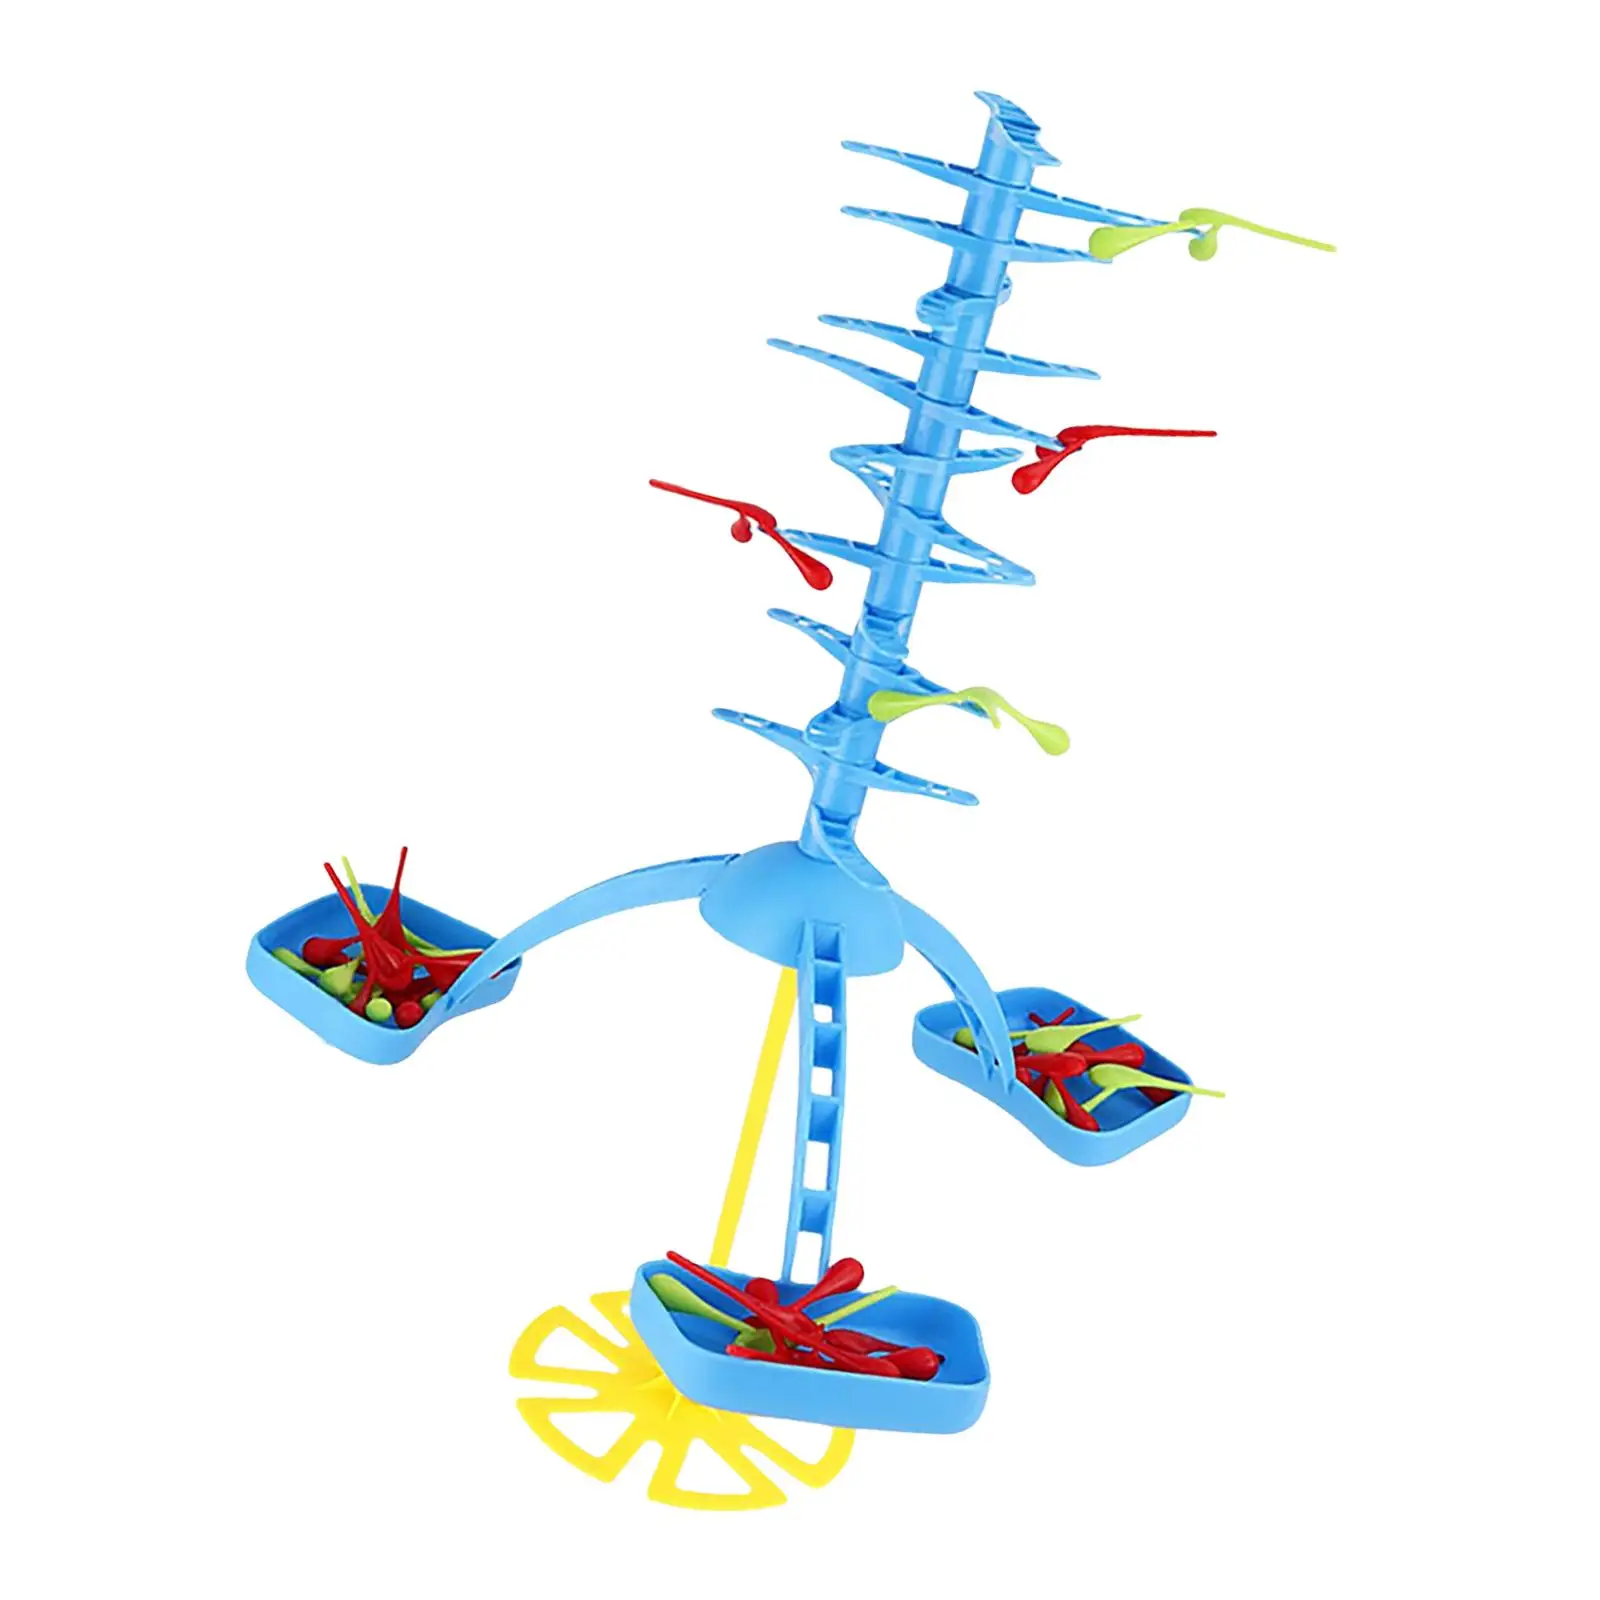 Gravity Balancing Bird Toy for Kids ,Play It Any Time Anywhere Multicolored